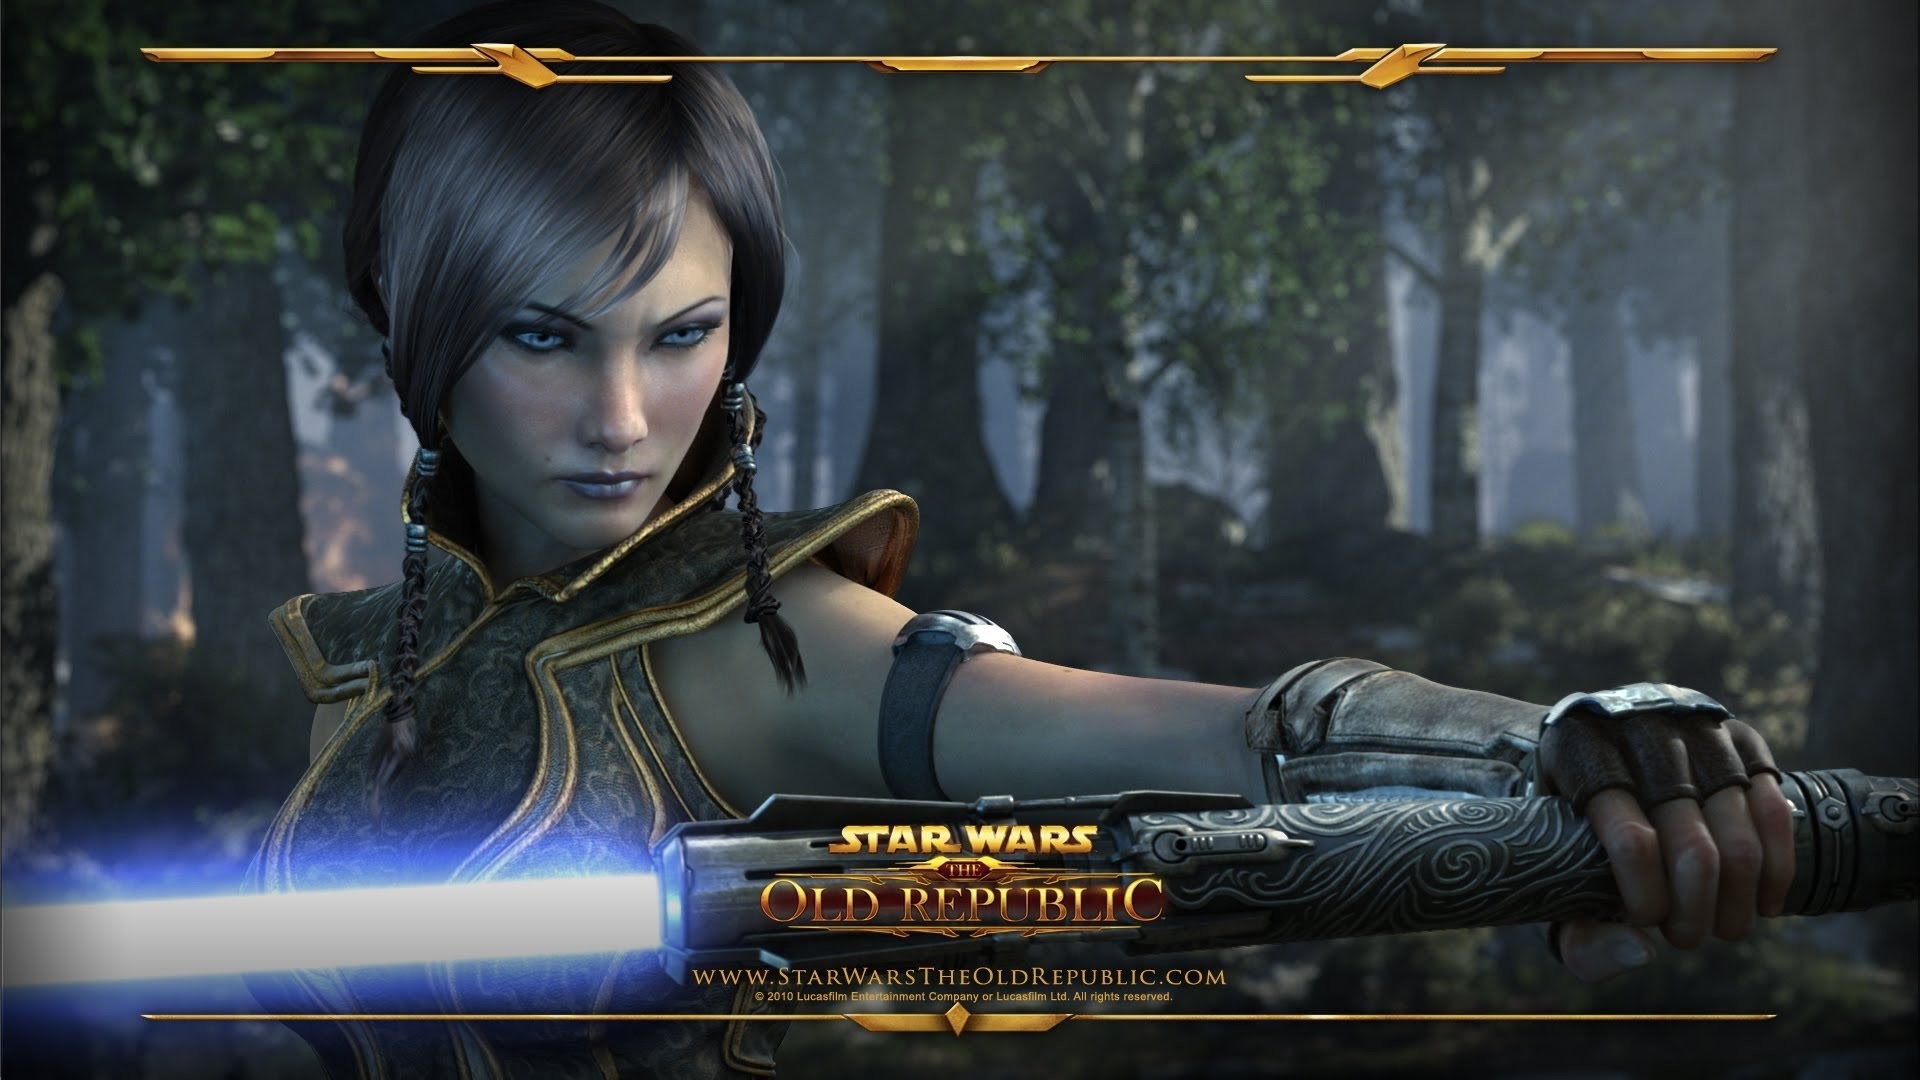 STAR WARS OLD REPUBLIC mmo rpg swtor fighting sci fi wallpaper 518951 WallpaperUP